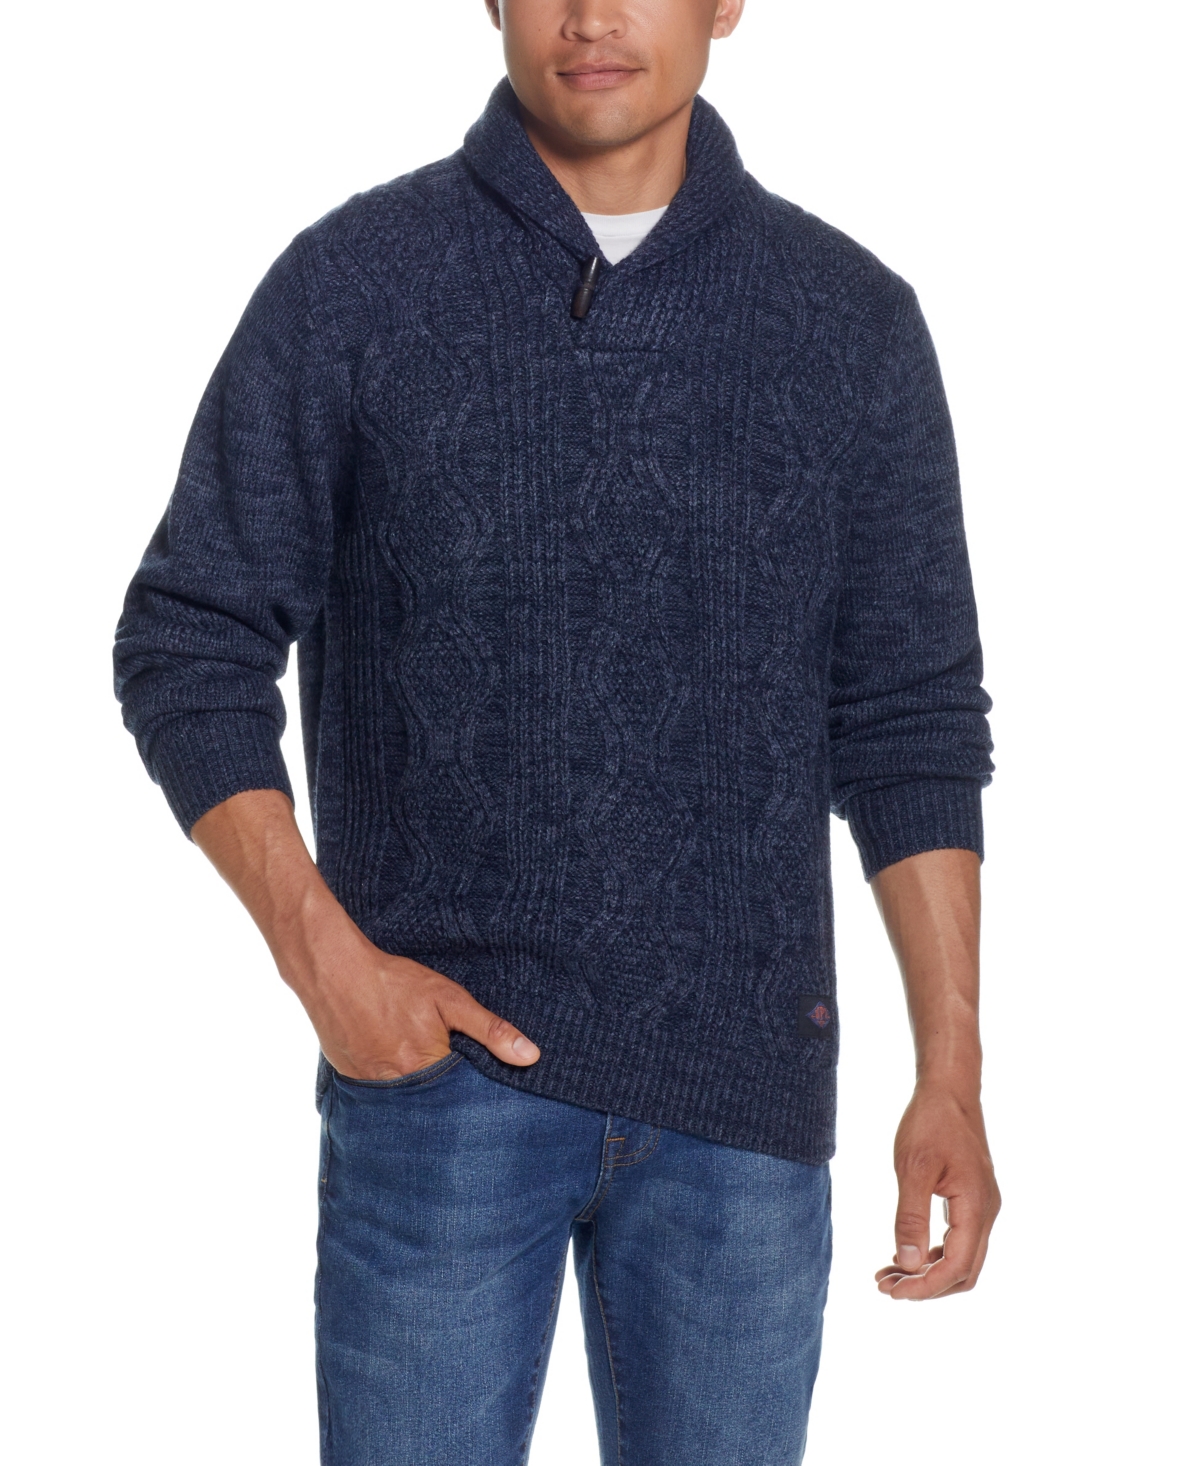 Men's Cable-Knit Fisherman Shawl Collar Sweater - Pale Gray Heather